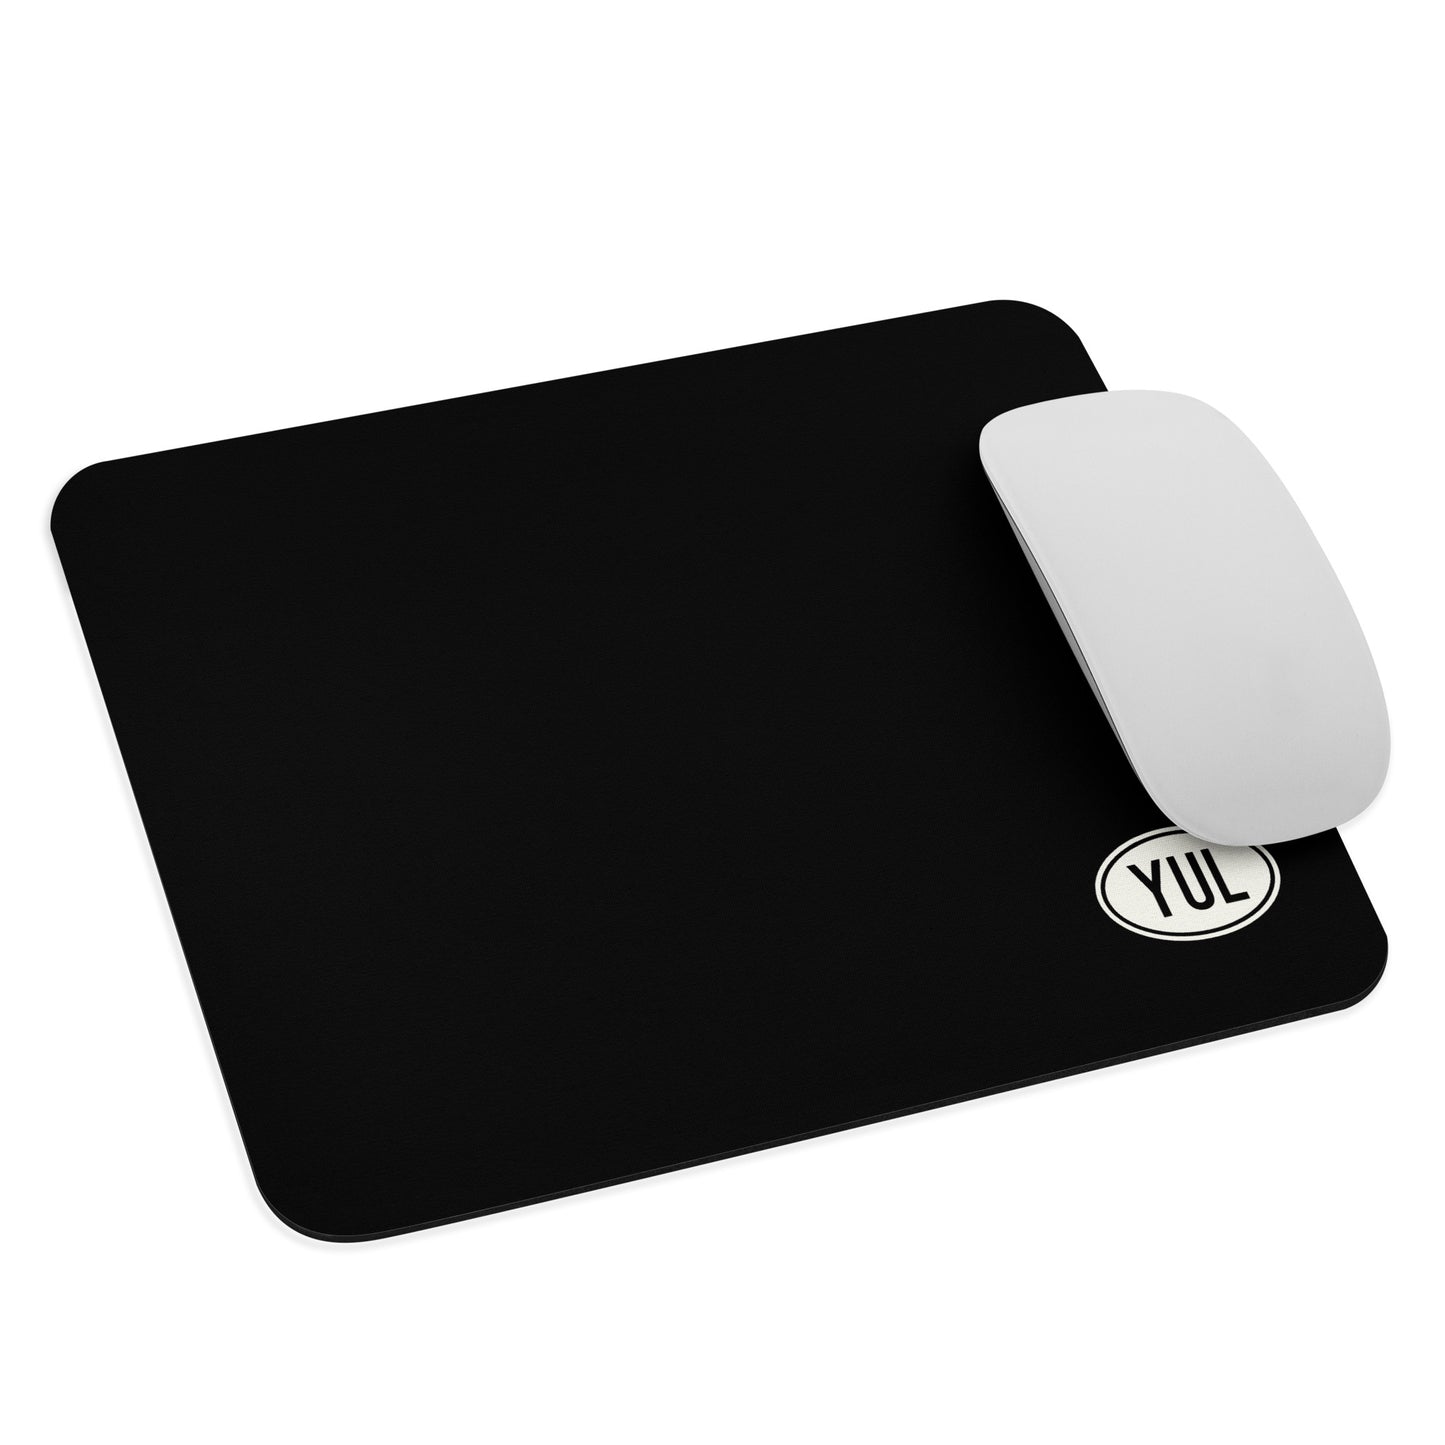 Unique Travel Gift Mouse Pad - White Oval • YUL Montreal • YHM Designs - Image 03